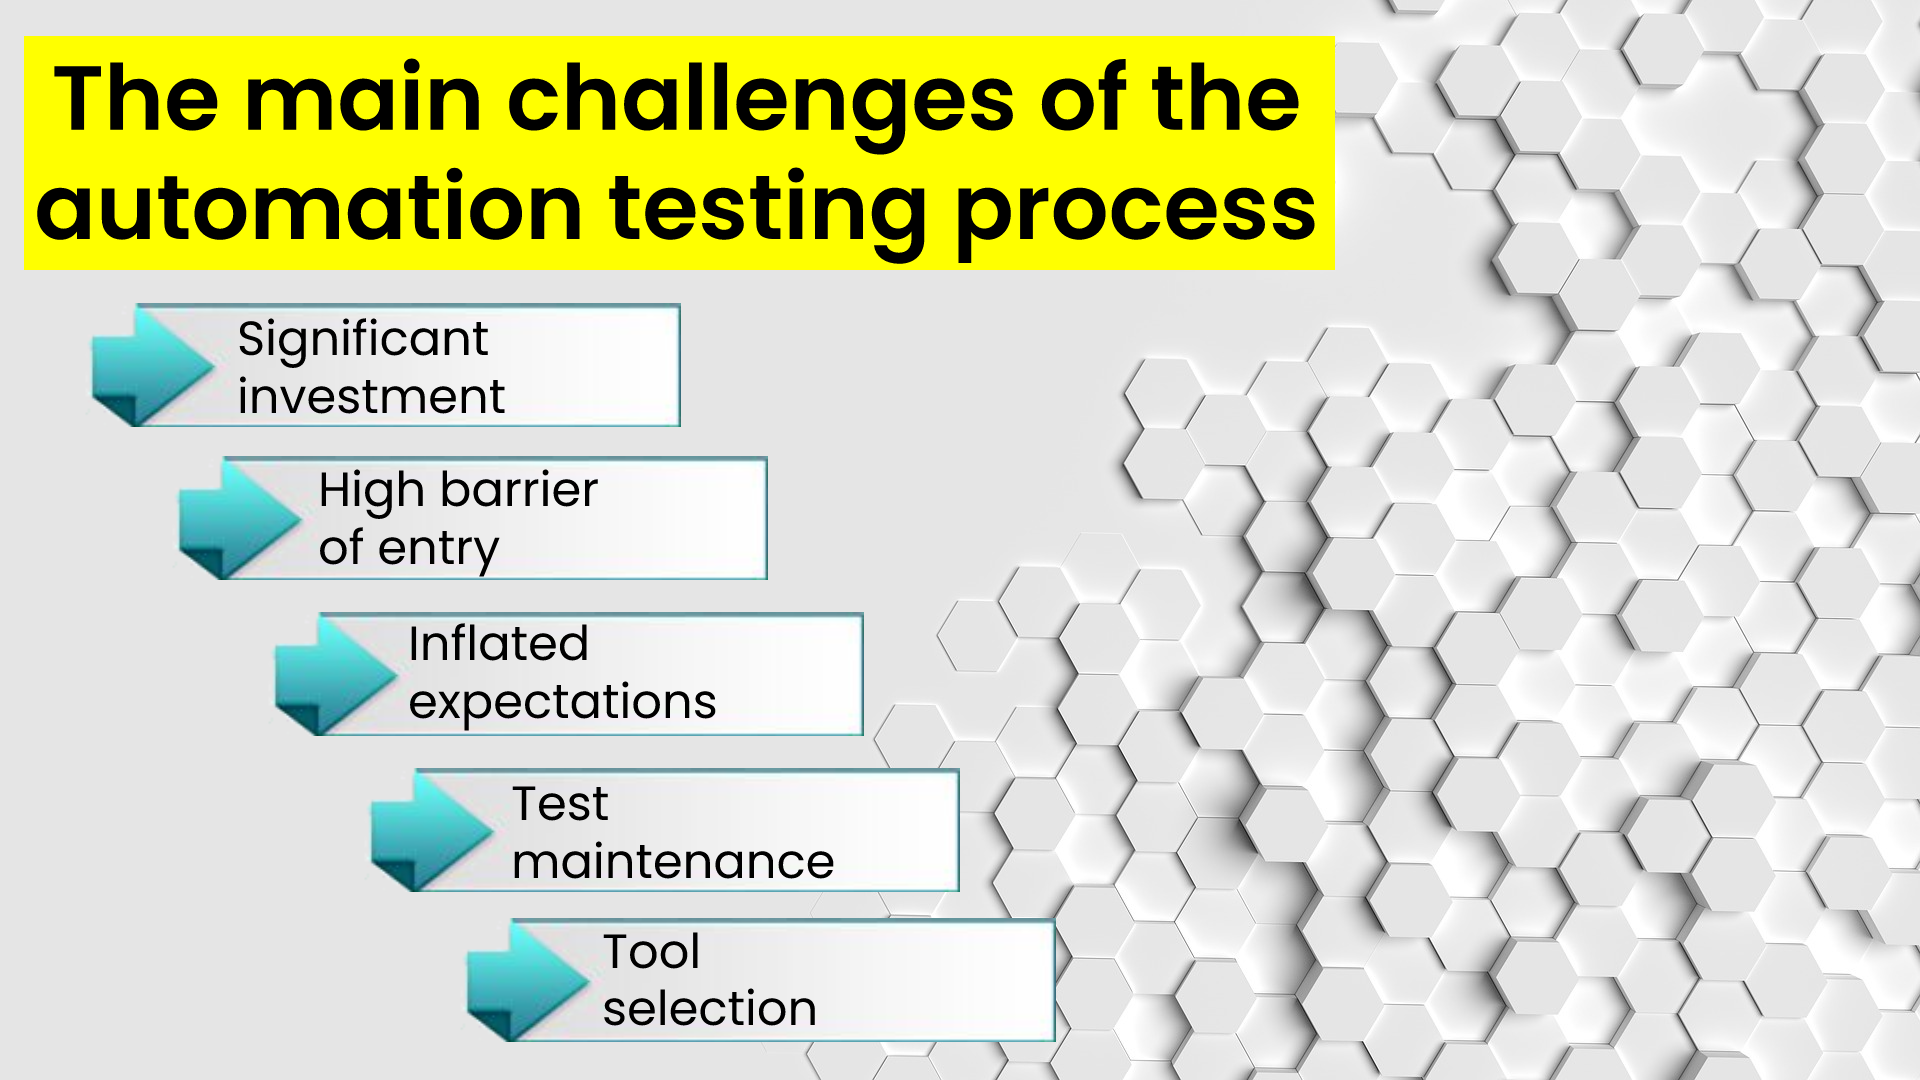 The main challenges of the automation testing process